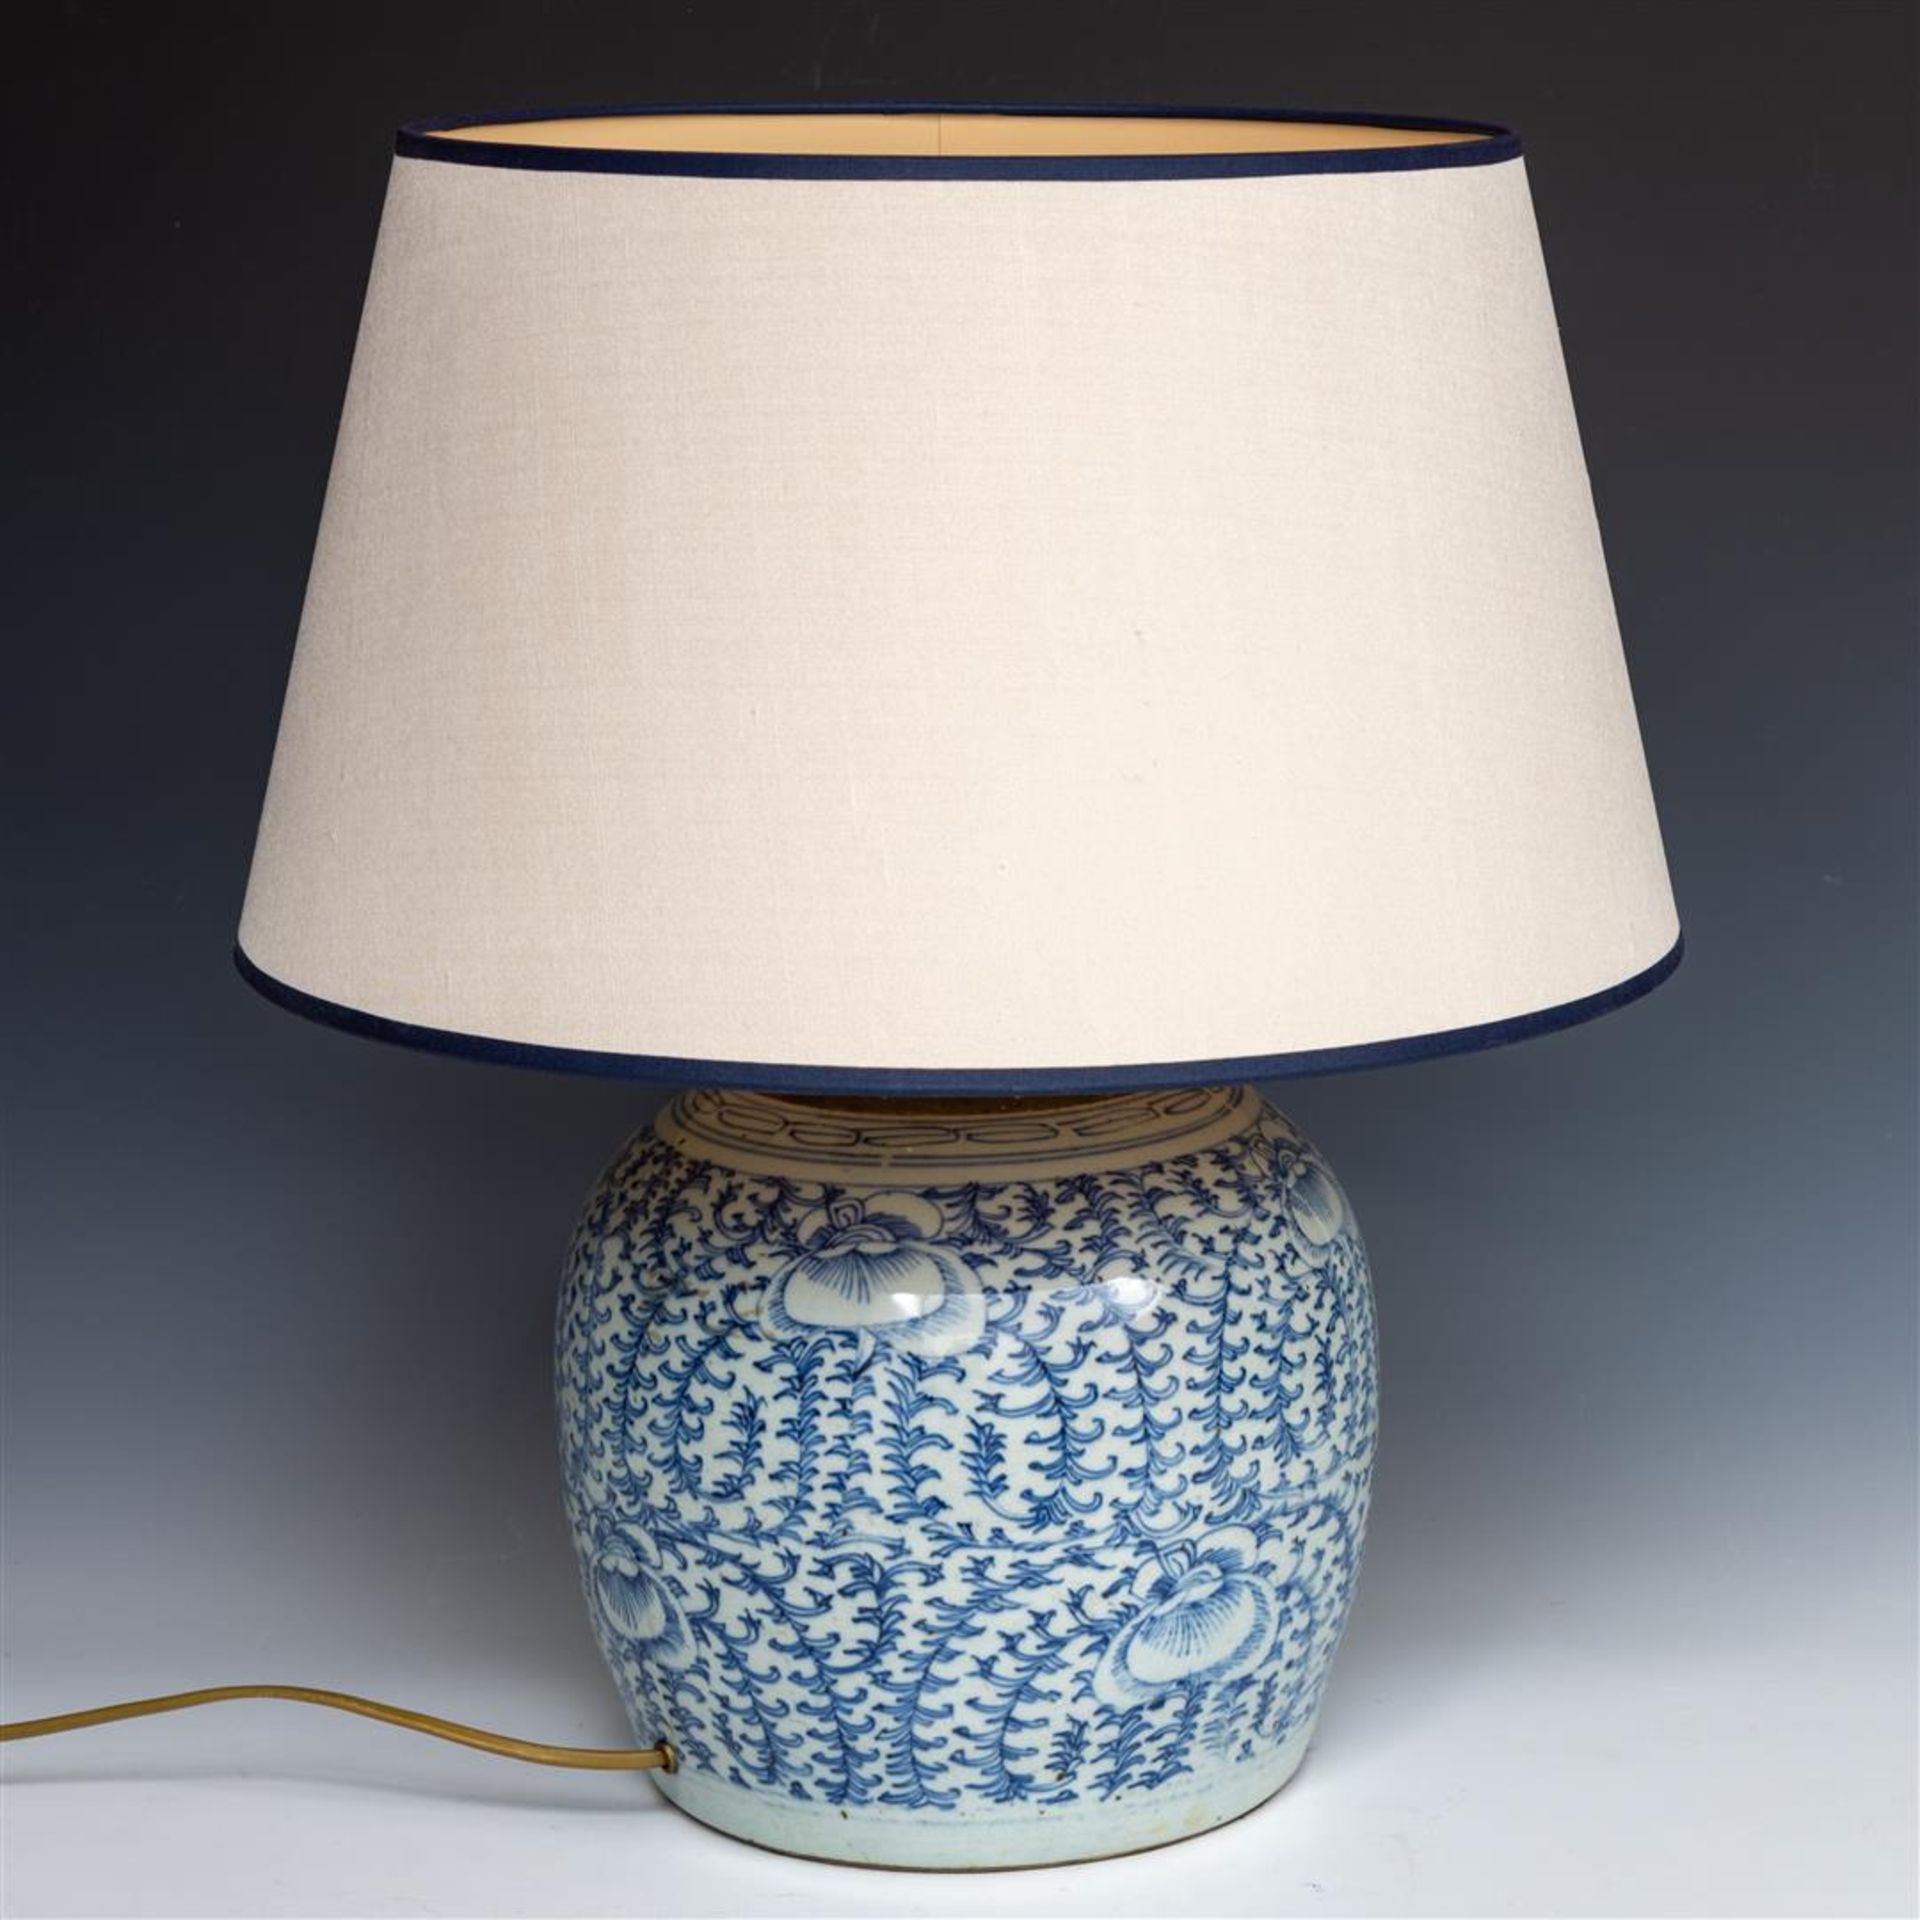 A set of Chinese pots made into table lamps.